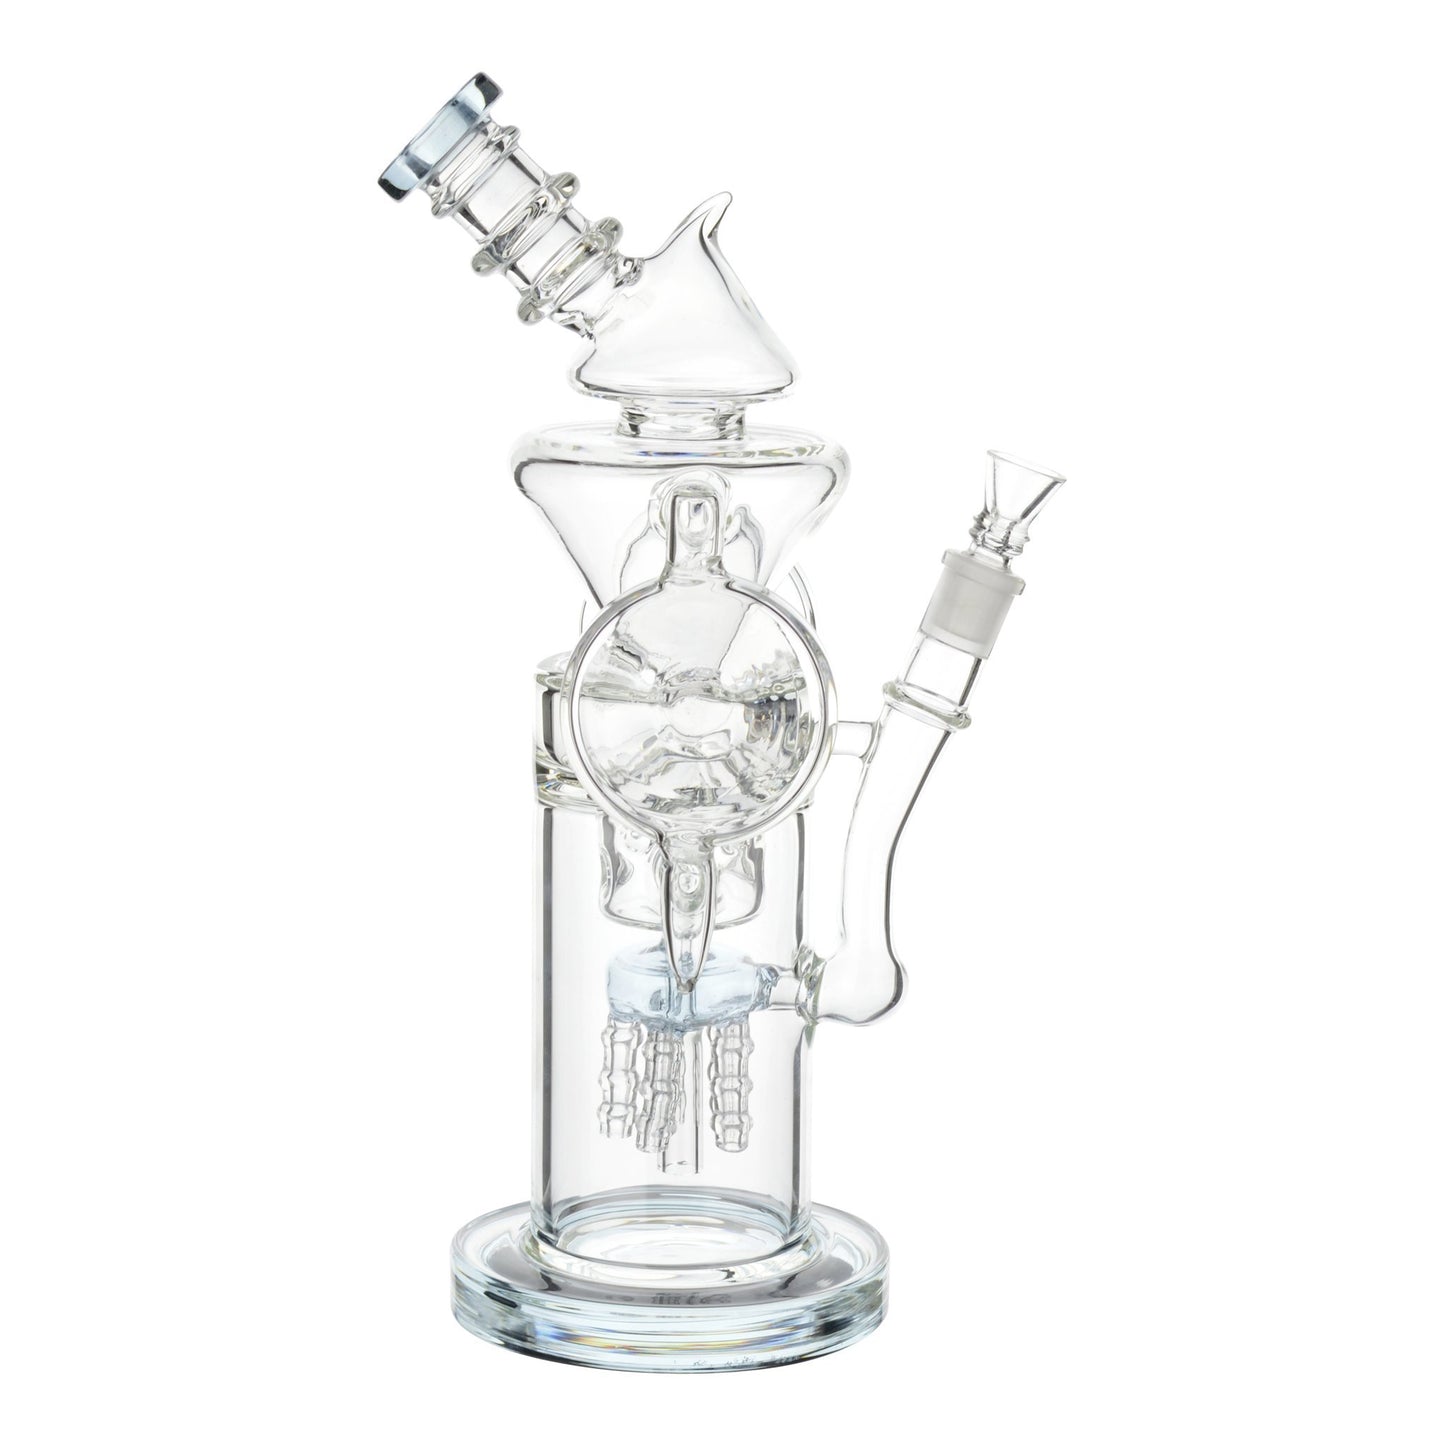 Full shot of crystal clear 13 inch glass bong with light teal perc and mouthpiece facing left